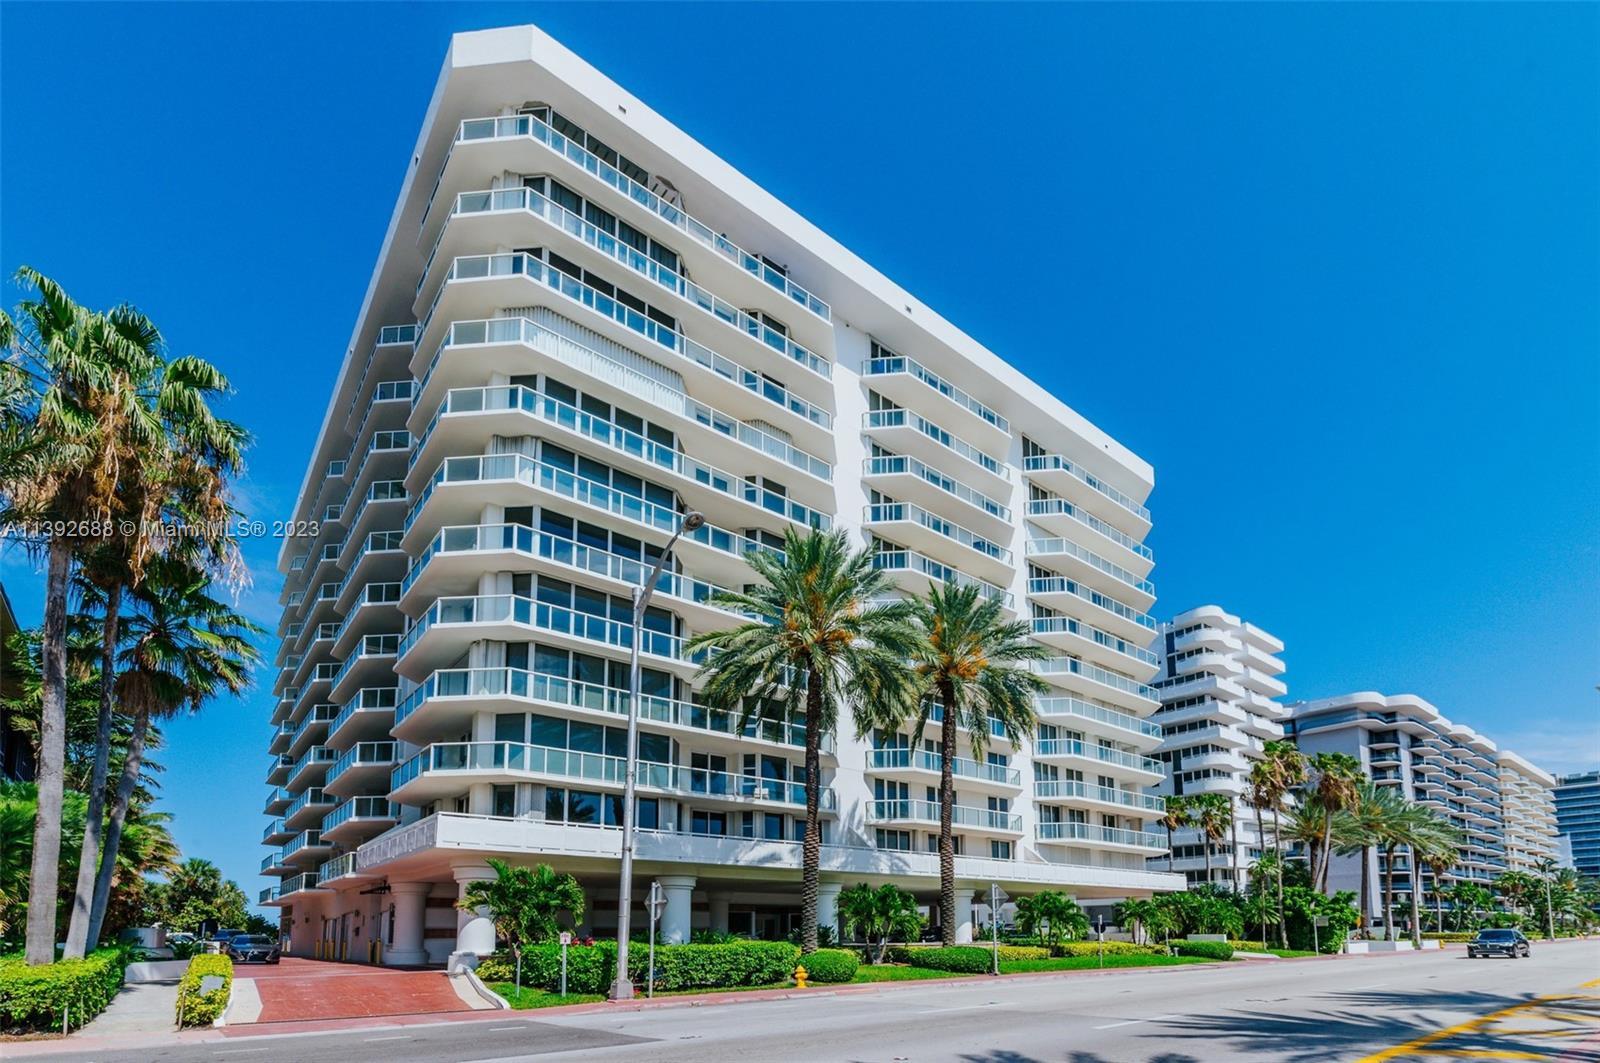 Beautiful 2 bedroom in Surfside, this unit has an Ocean view, and sunset   Lounge on a large balcony